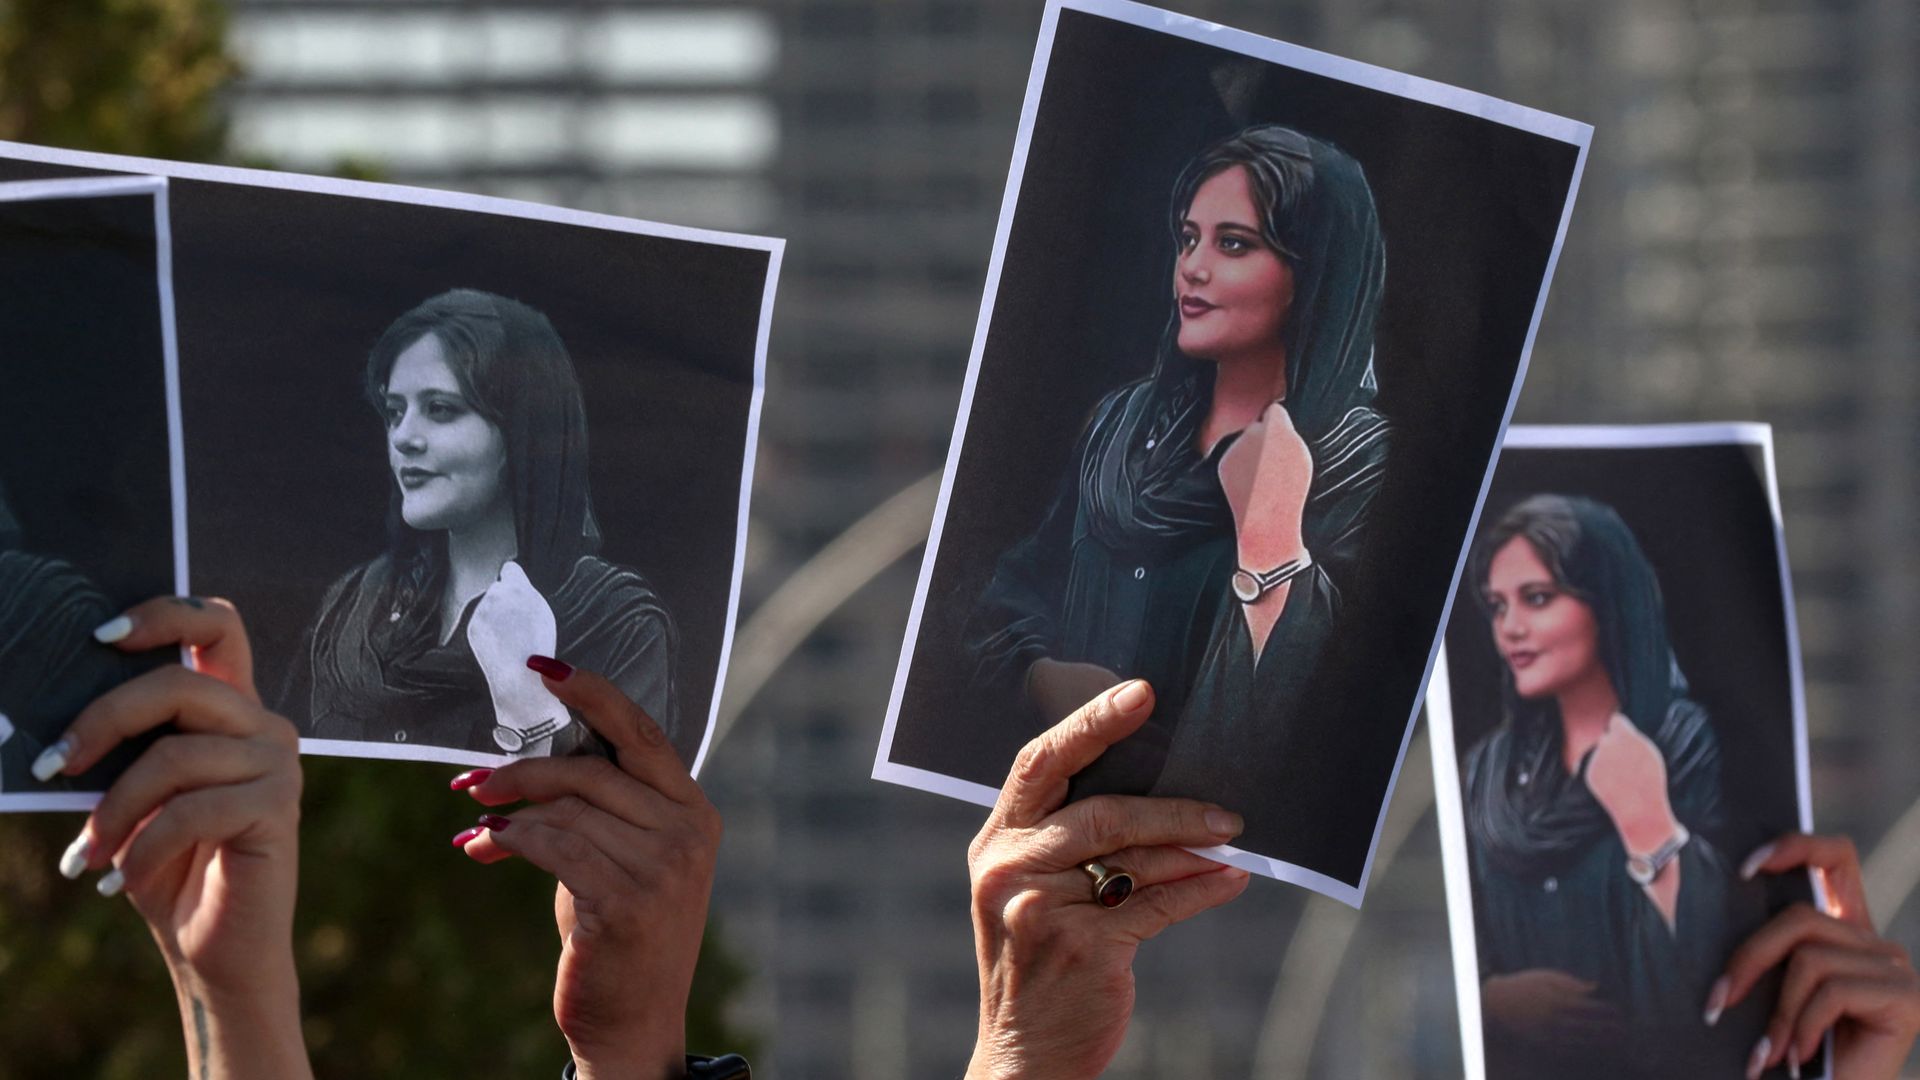 Women hold up signs depicting the image of 22-year-old Mahsa Amini, who died while in Iranian custody, during a demonstration  outside the UN offices in Arbil, Kurdistan region, on September 24.